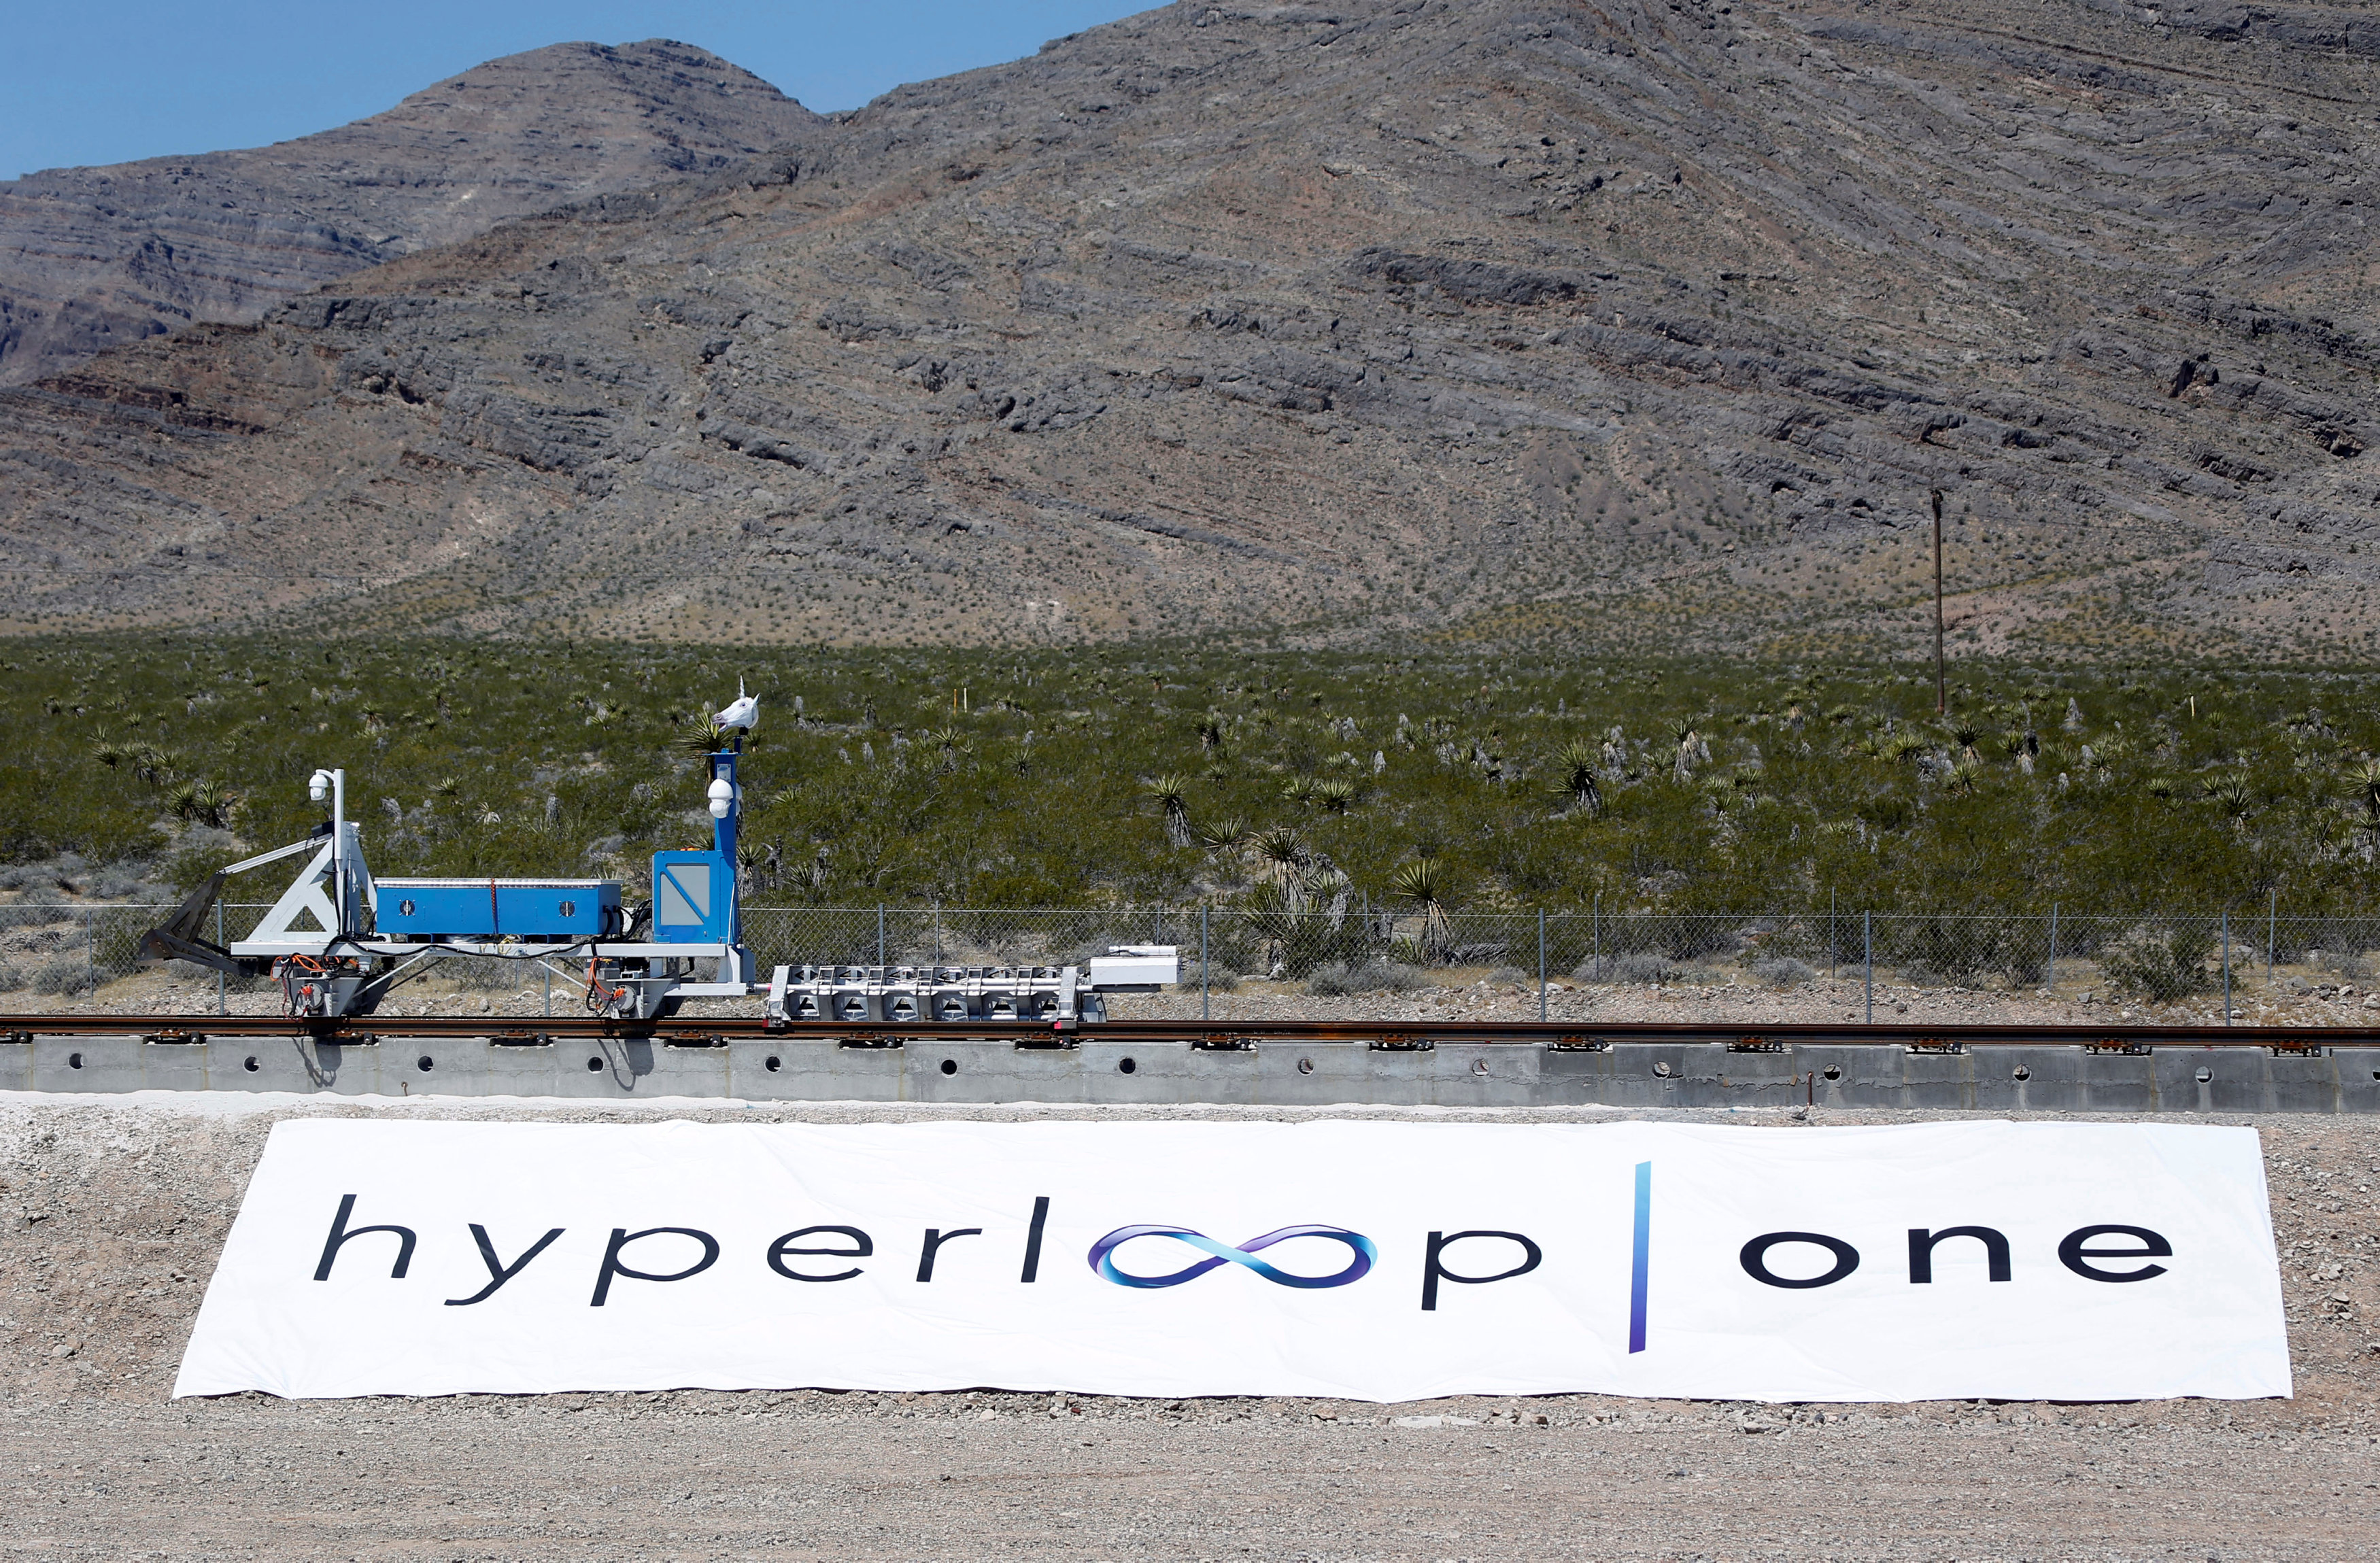 In the next couple of years, it will be possible to travel from Los Angeles to Las Vegas in just 20 minutes. Hyperloop One, a Los Angeles-based startup, has taken a step towards that goal with its first public test of the supersonic transport system in front of investors, journalists and employees.